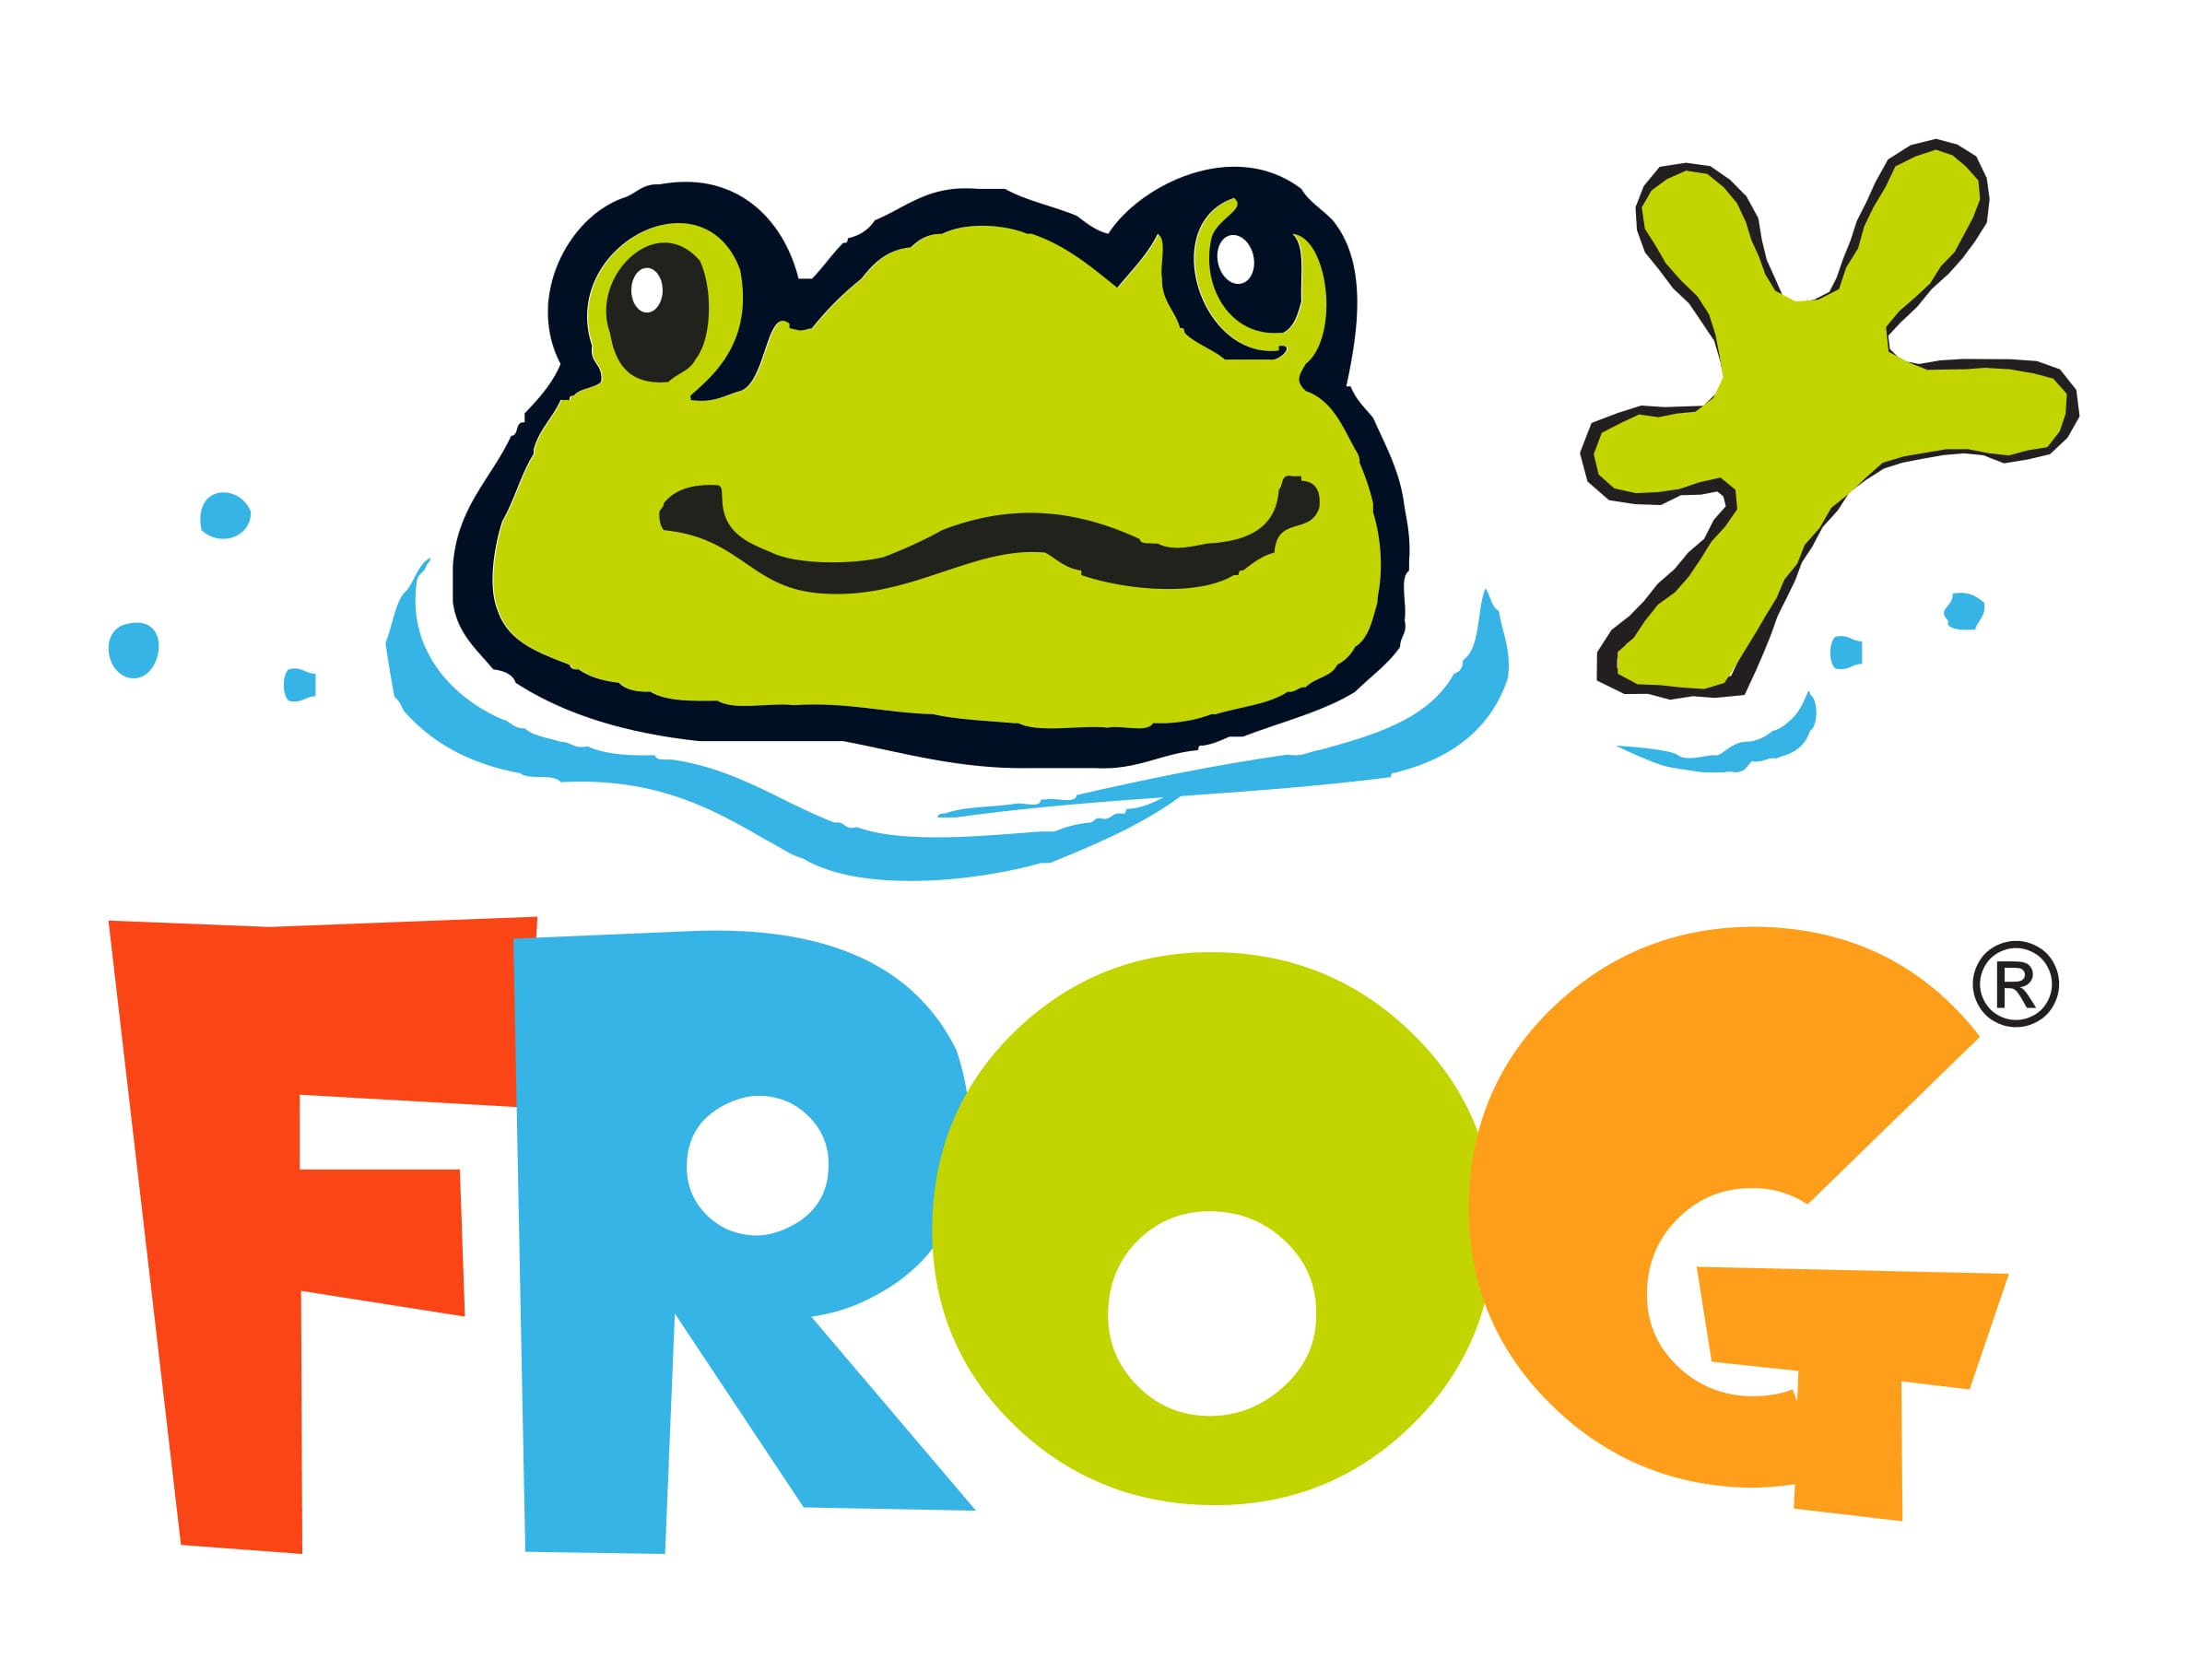 How to Install and Use Your Pool Frog